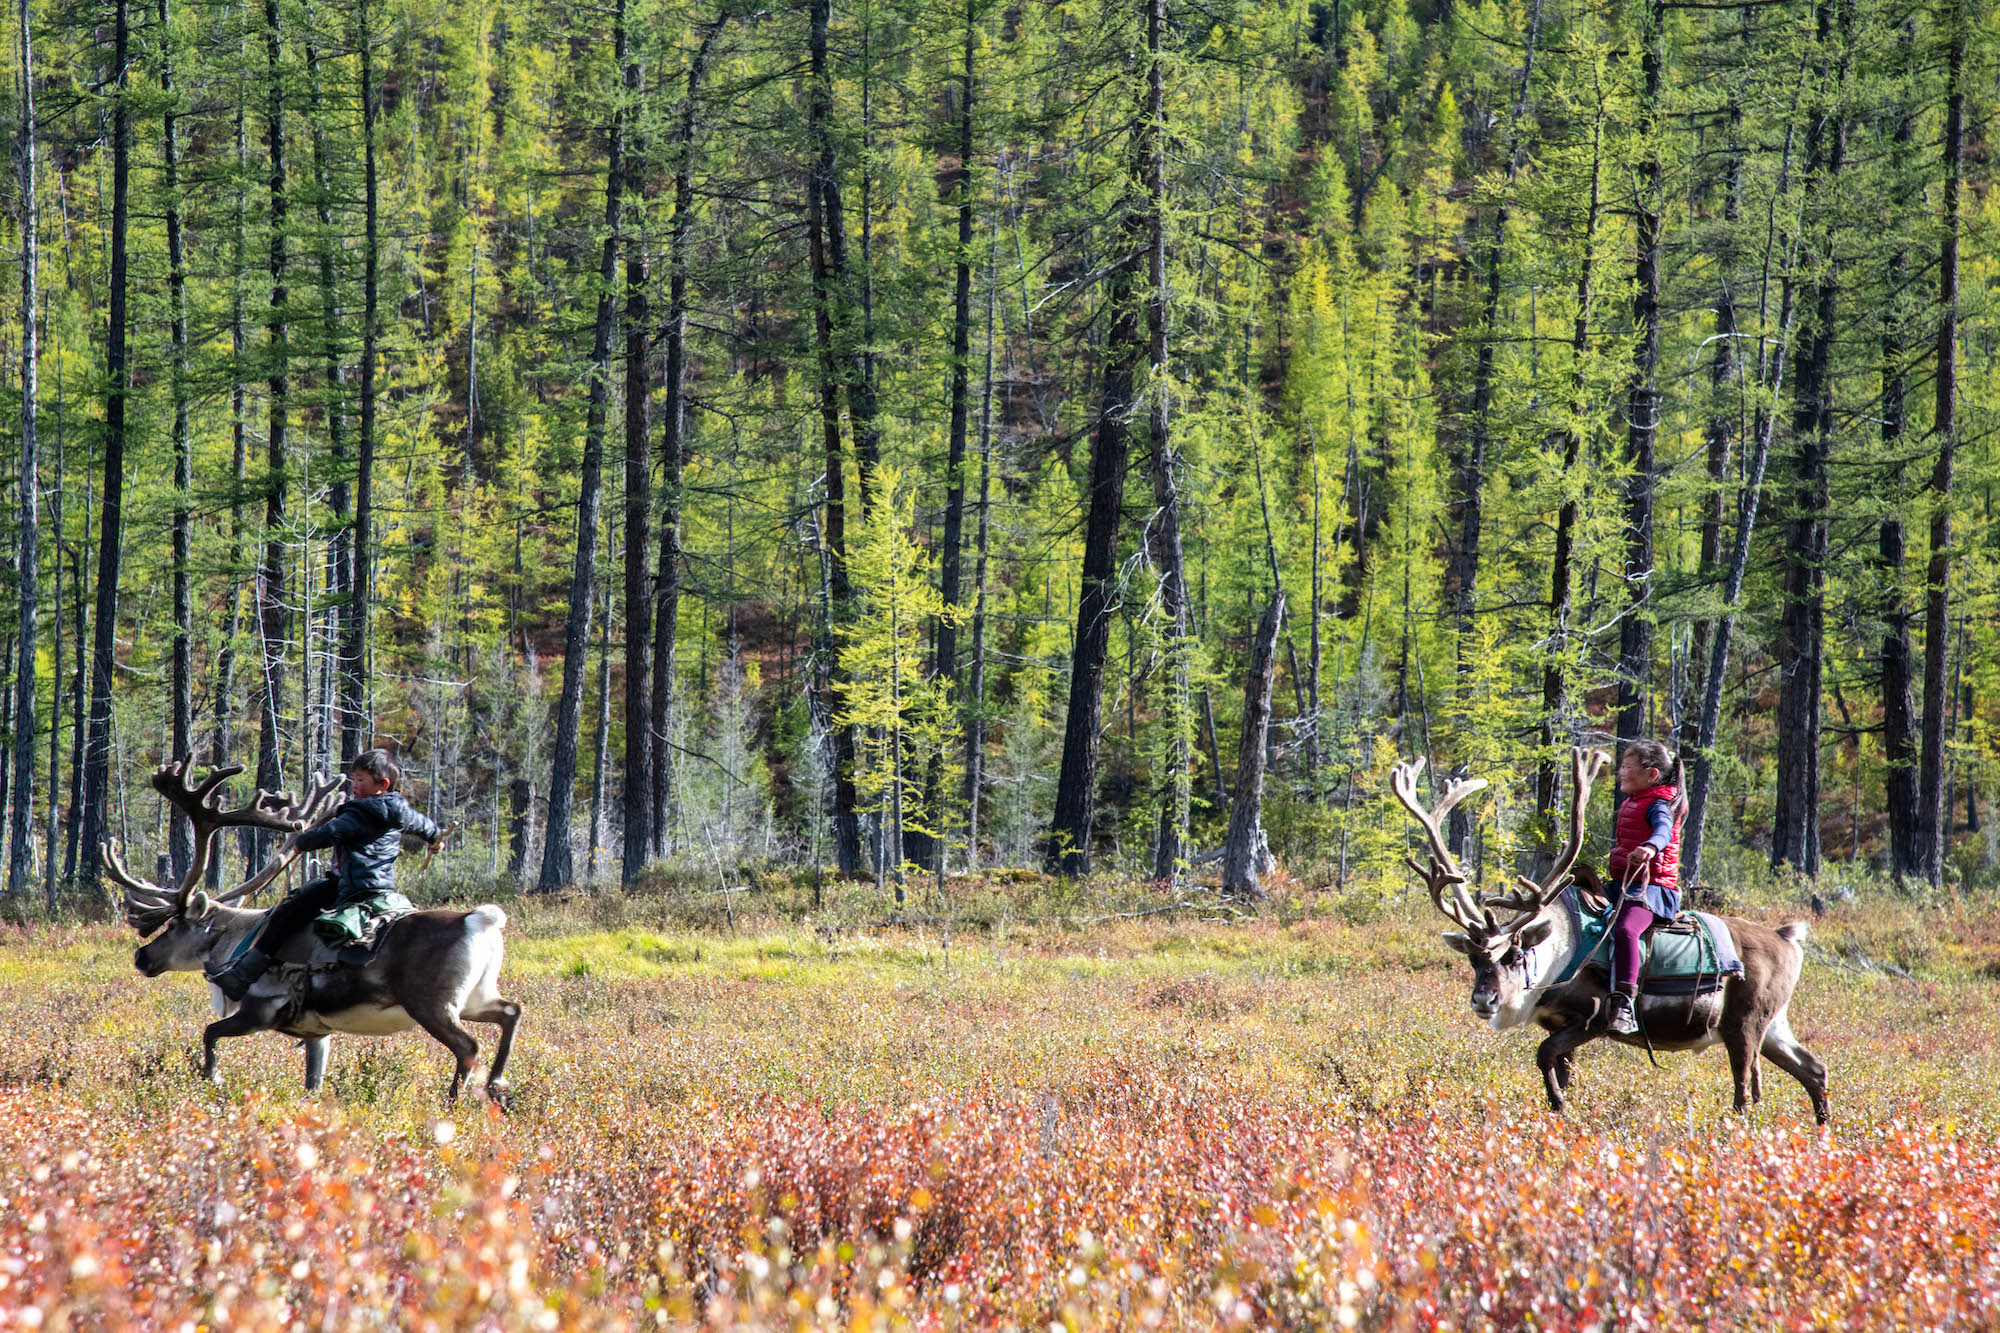 Two young children ride their respective reindeer from right to left across the frame. The background is a wall of trees, and the foreground is filled with reddish-yellow undergrowth.